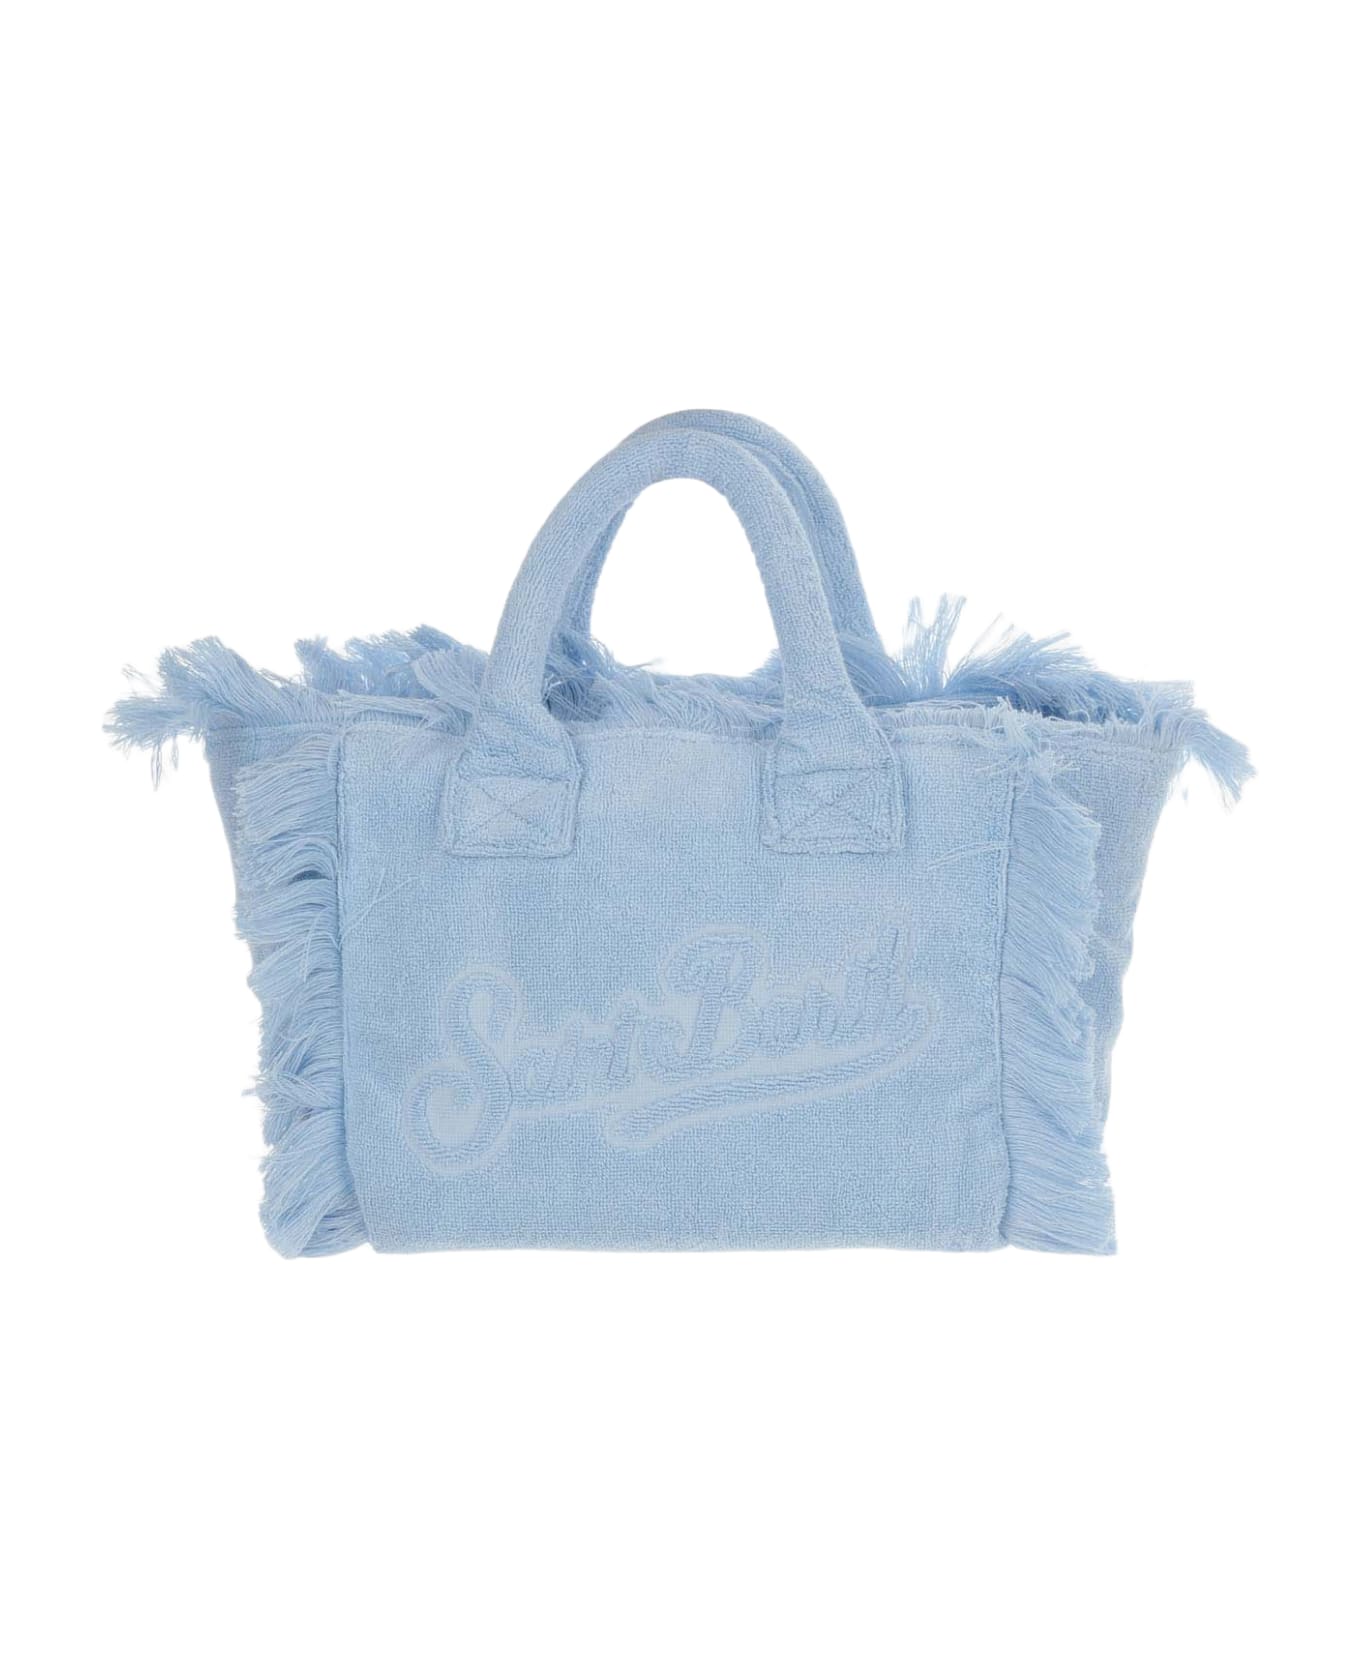 MC2 Saint Barth Colette Terry Cloth Tote Bag With Embroidery - Clear Blue